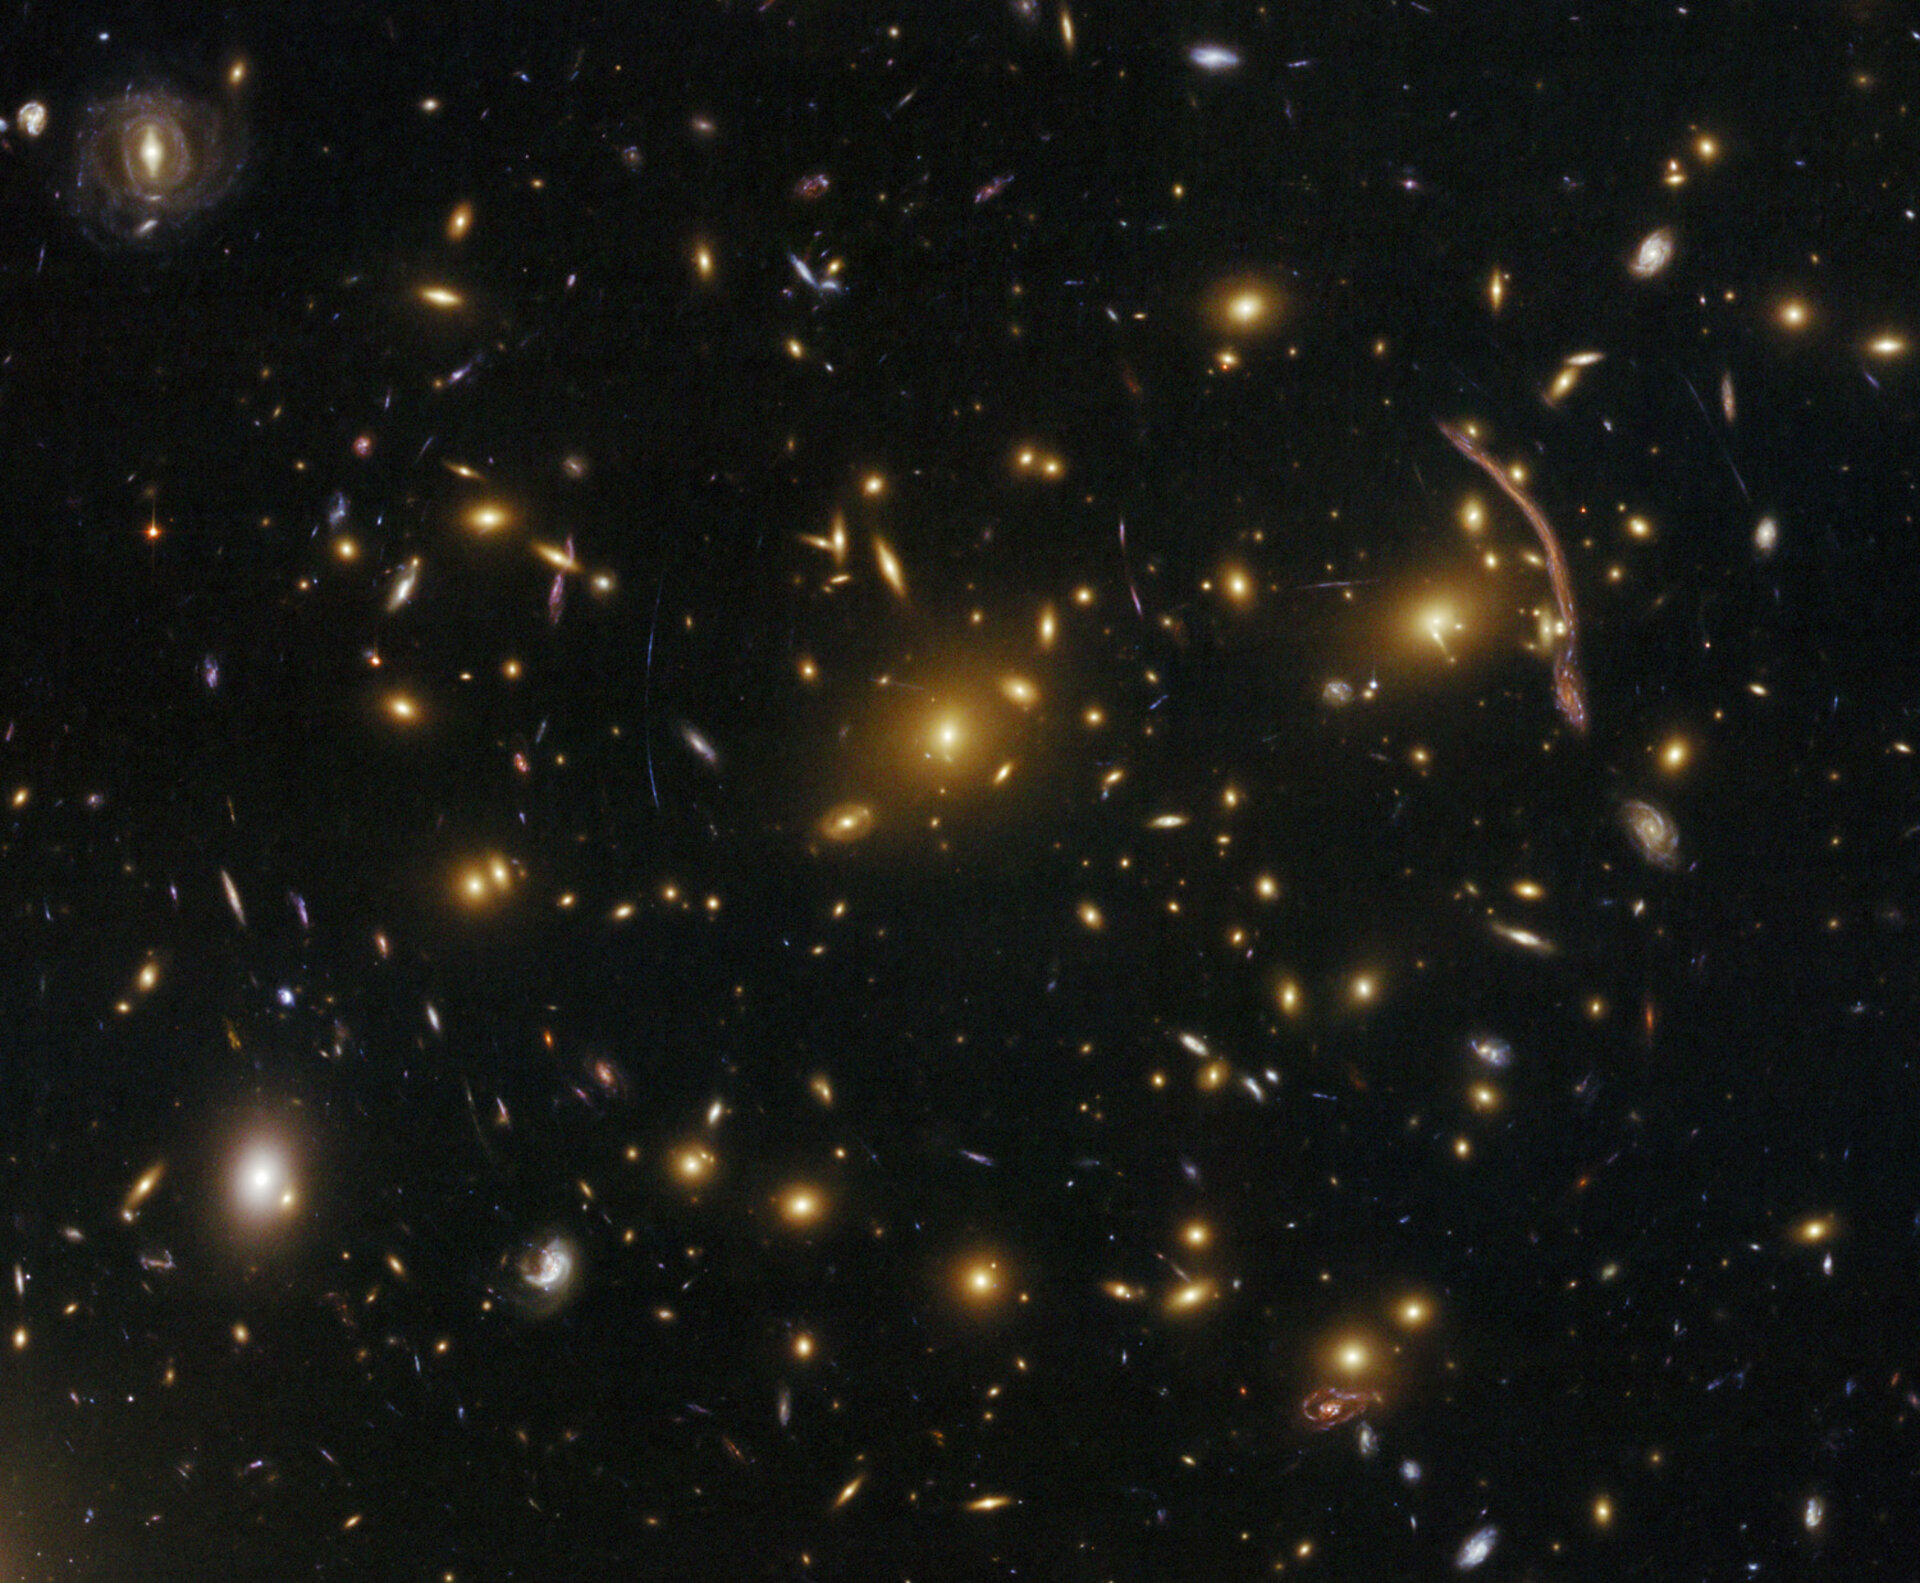 Gravitational lensing in the galaxy cluster Abell 370